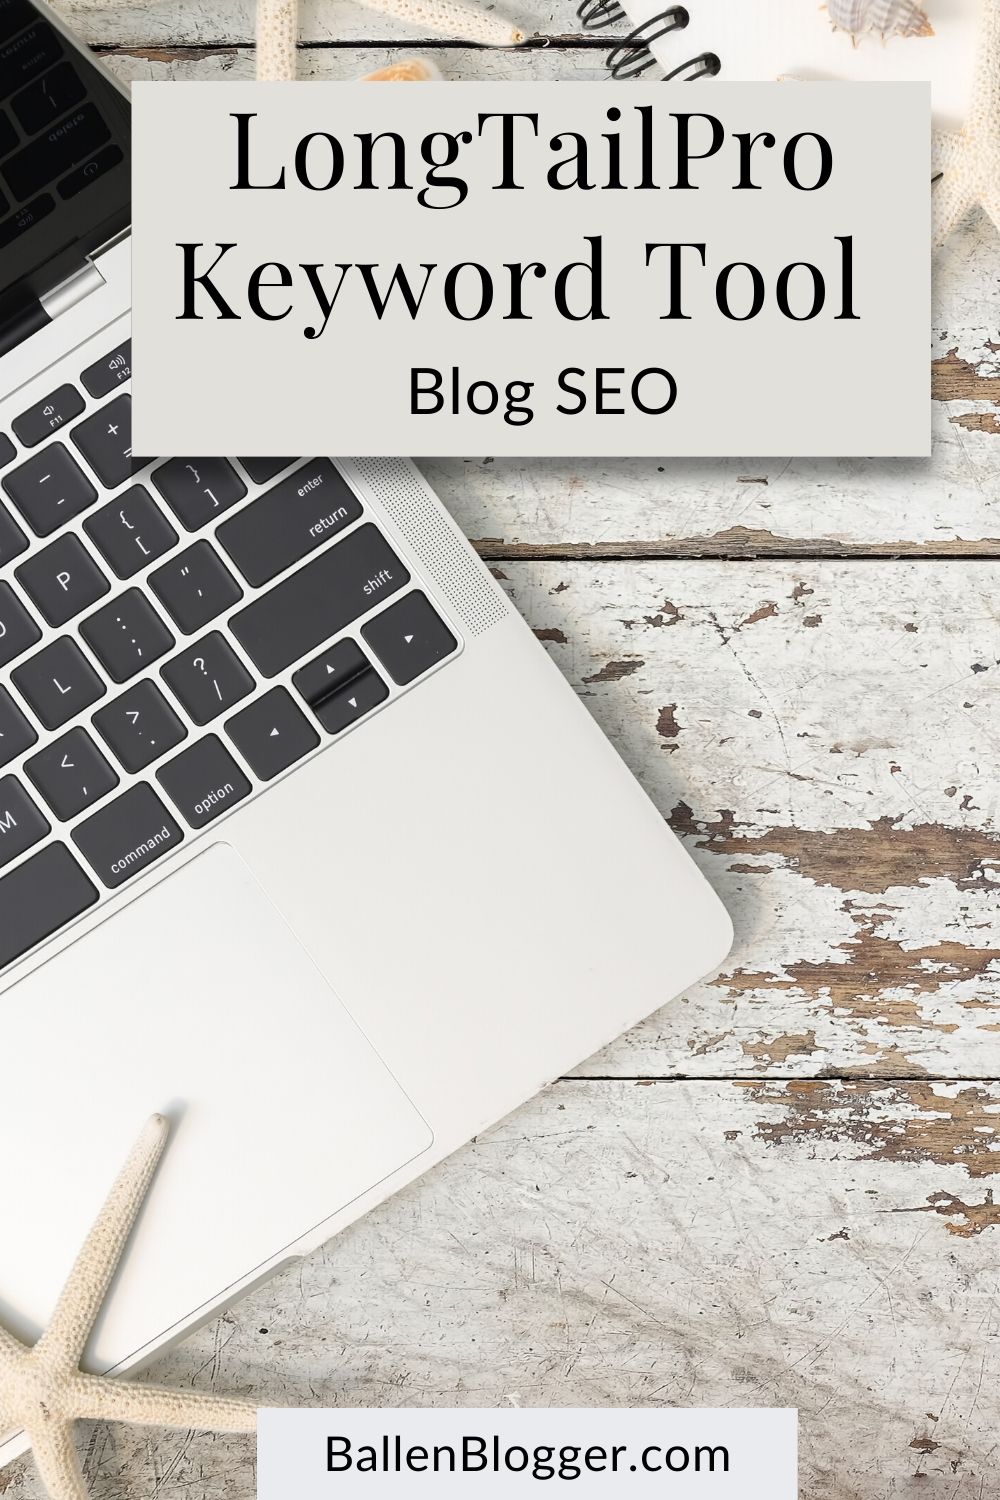 LongTailPro specializes in finding long-tail keywords, as the name suggests. 